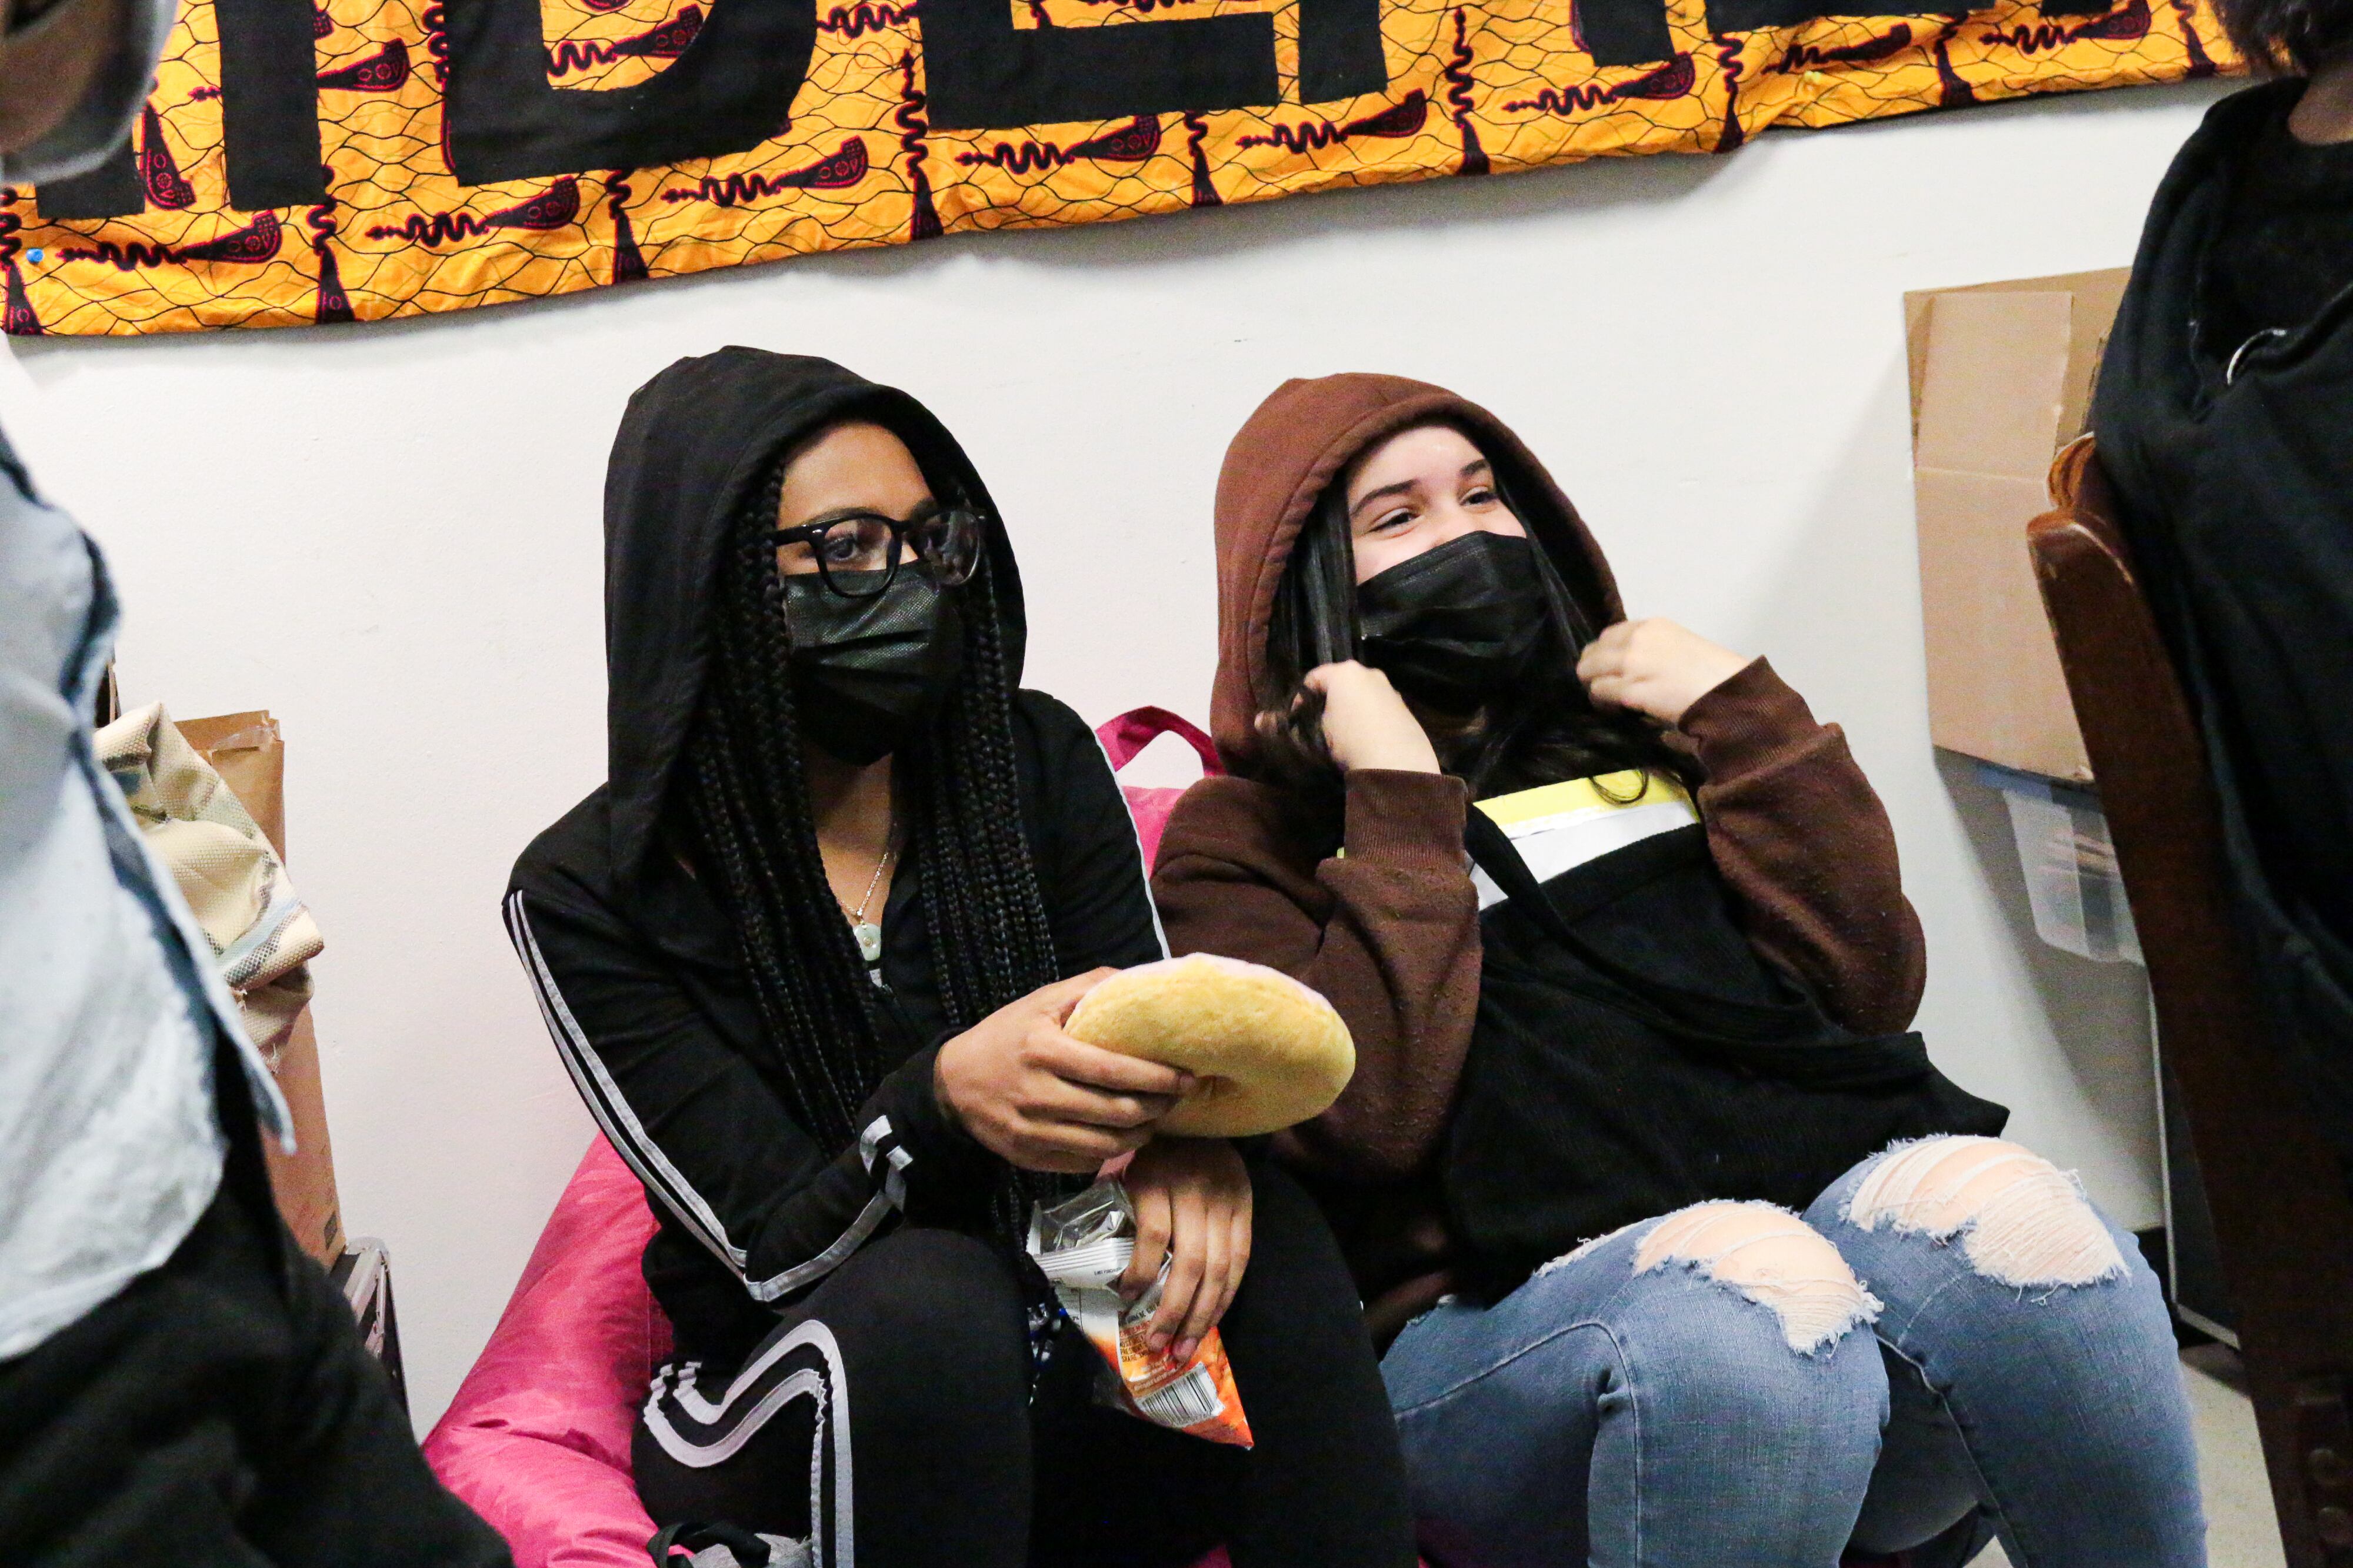 Two students in masks and hoodies lean against a wall under a banner.